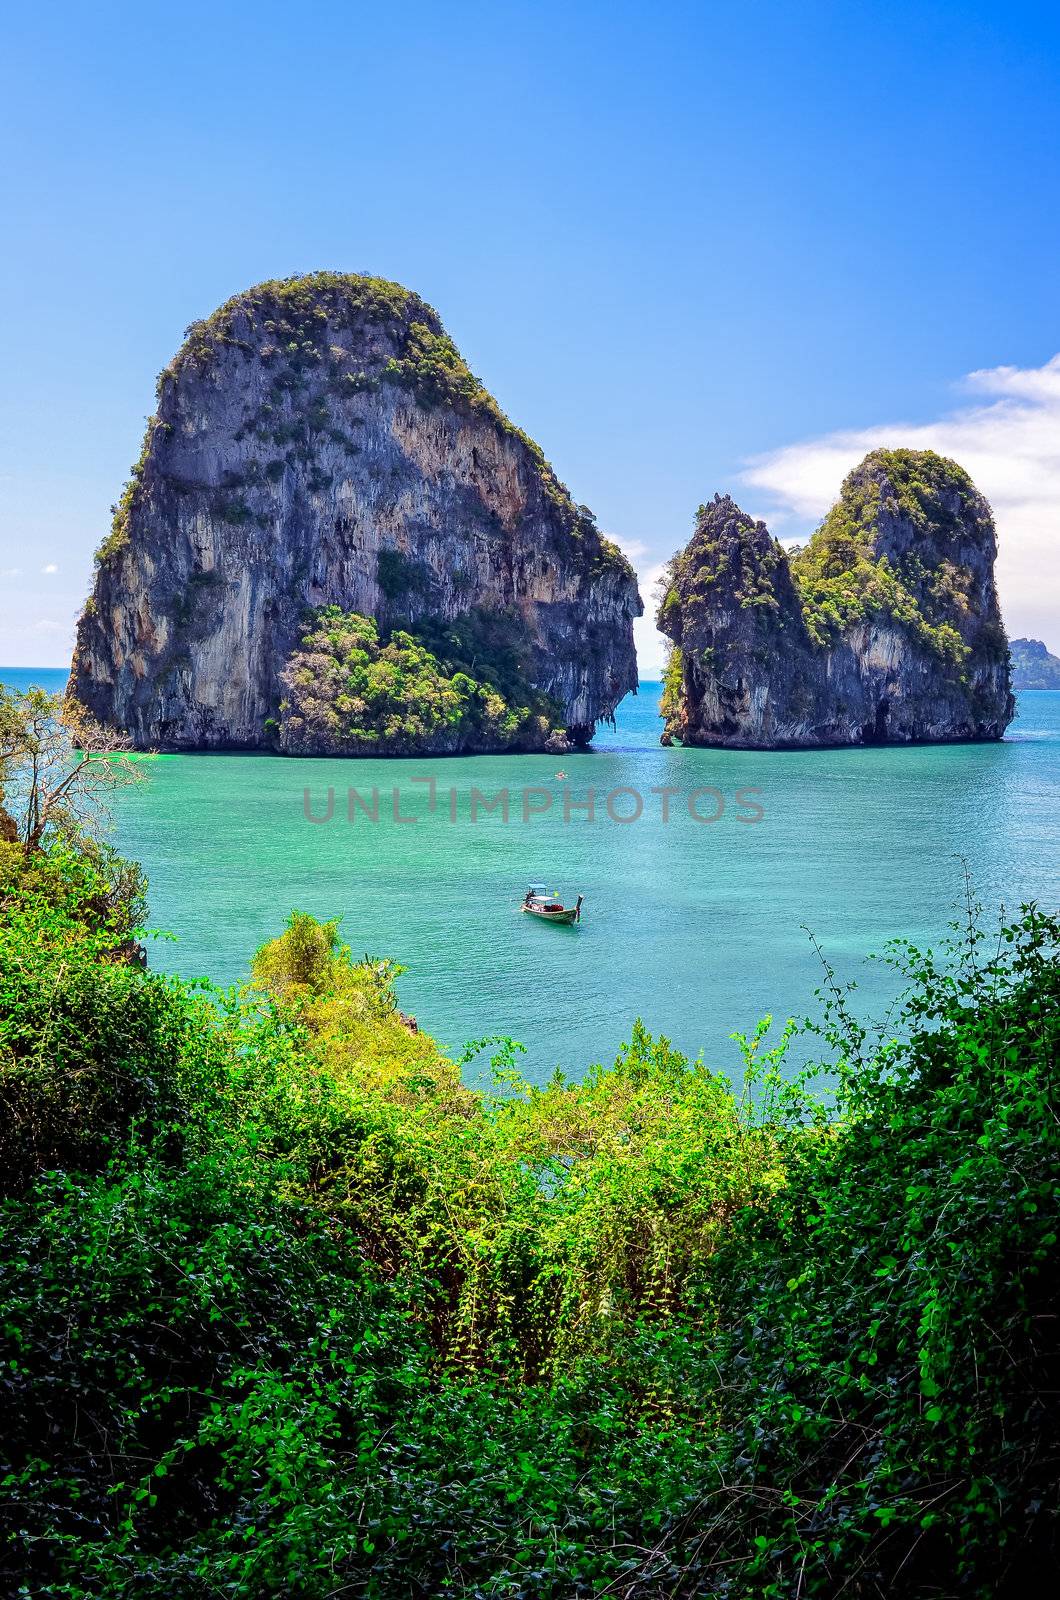 Tropical island and ocean view with boat, Andaman sea, Krabi, Thailand